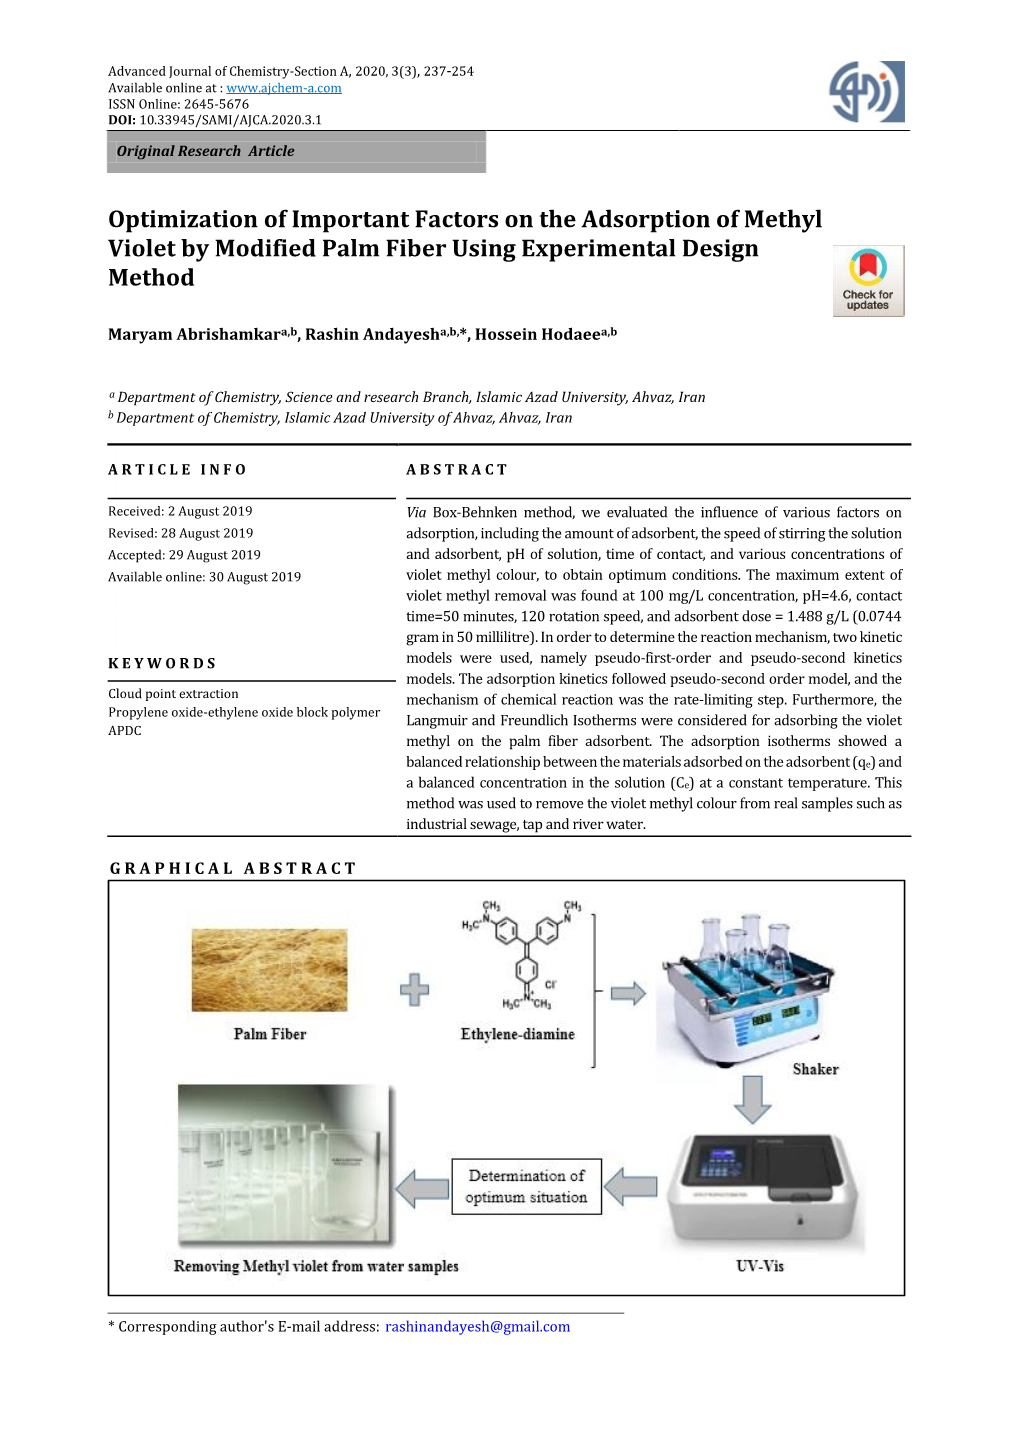 Optimization of Important Factors on the Adsorption of Methyl Violet by Modified Palm Fiber Using Experimental Design Method